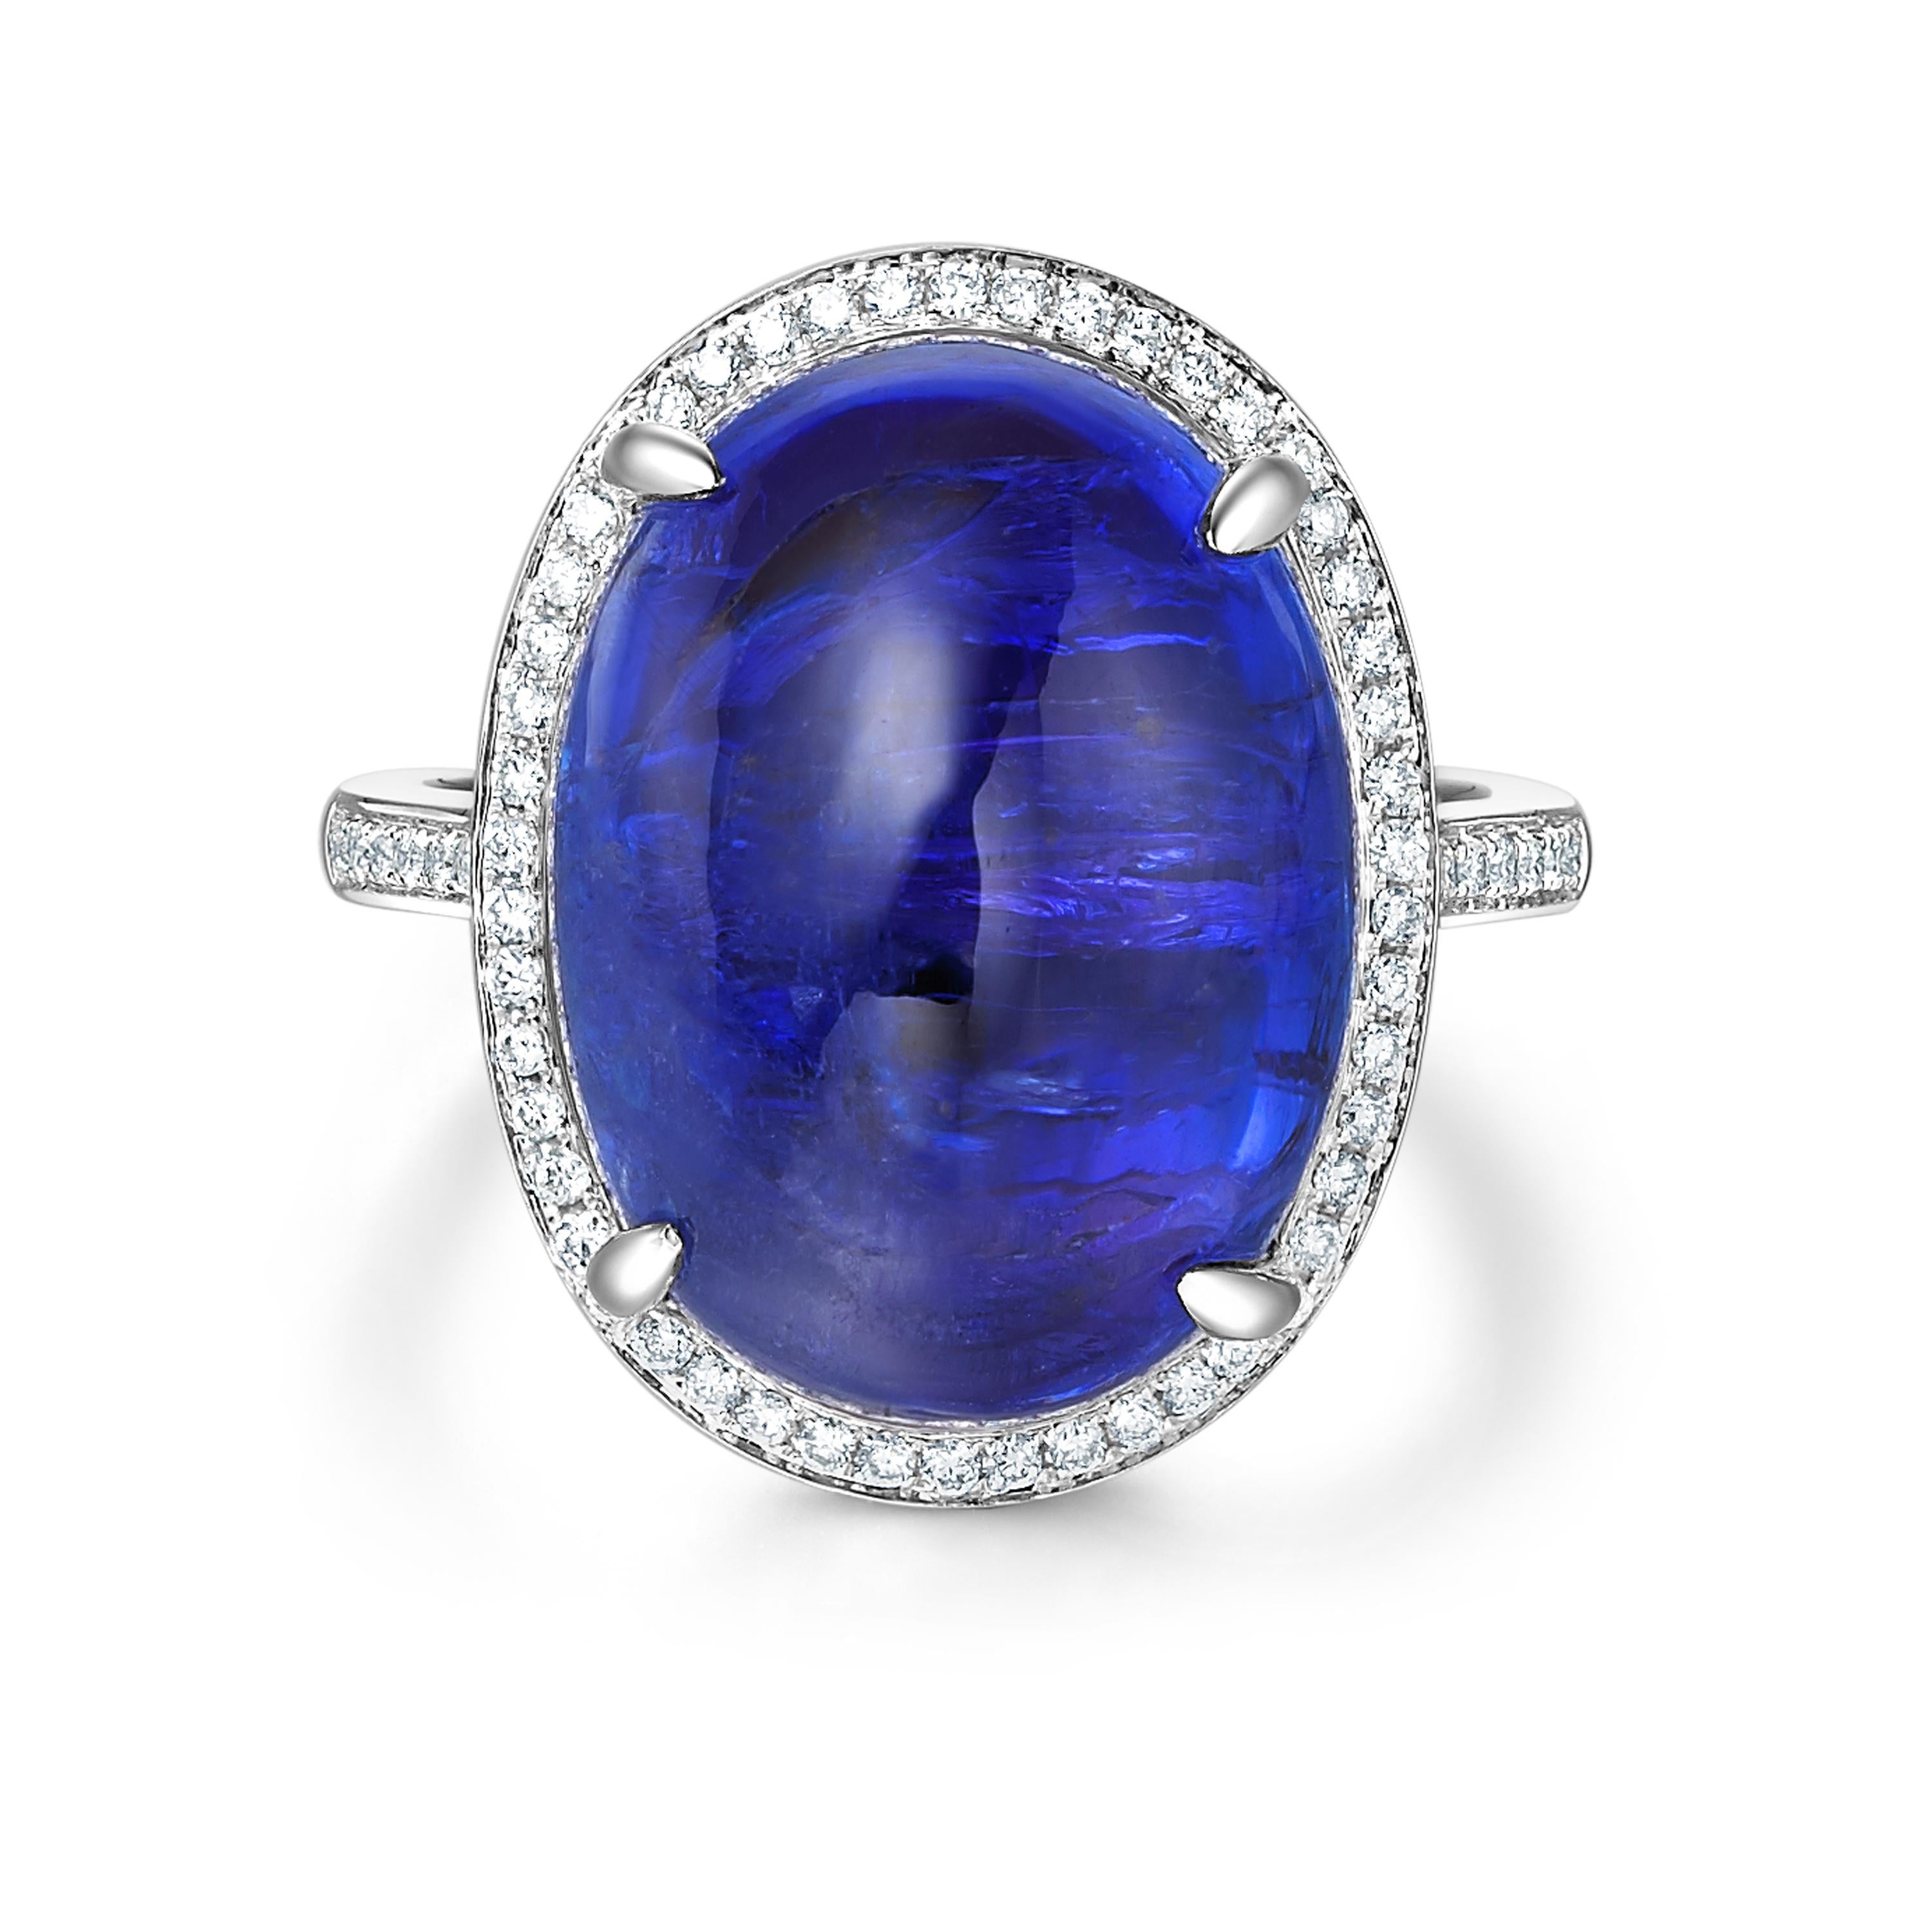 Description:
Fei Liu one-off ring with 17.45ct vivid blue tanzanite cabochon with 0.22ct brilliant diamonds.

Ring size: N (UK)

Inspiration:
The glamour of the royal tanzanite combined with the glamour of the shimmering diamonds, makes this the